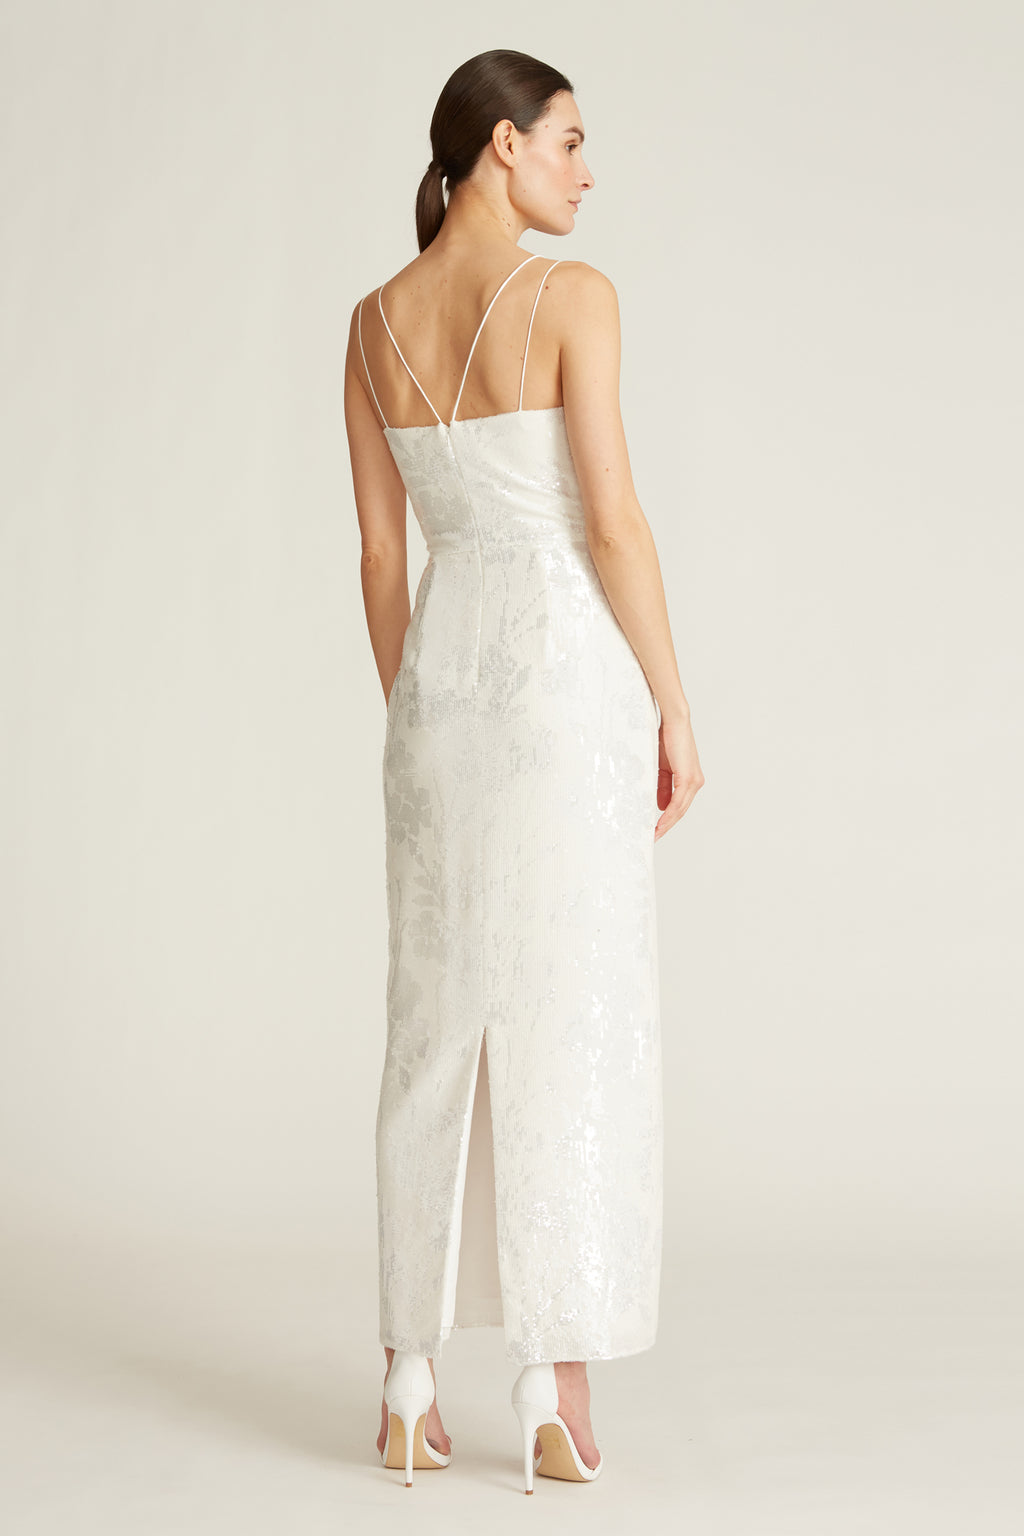 Theia - Saylor Sequin Cowl Dress - Ivory